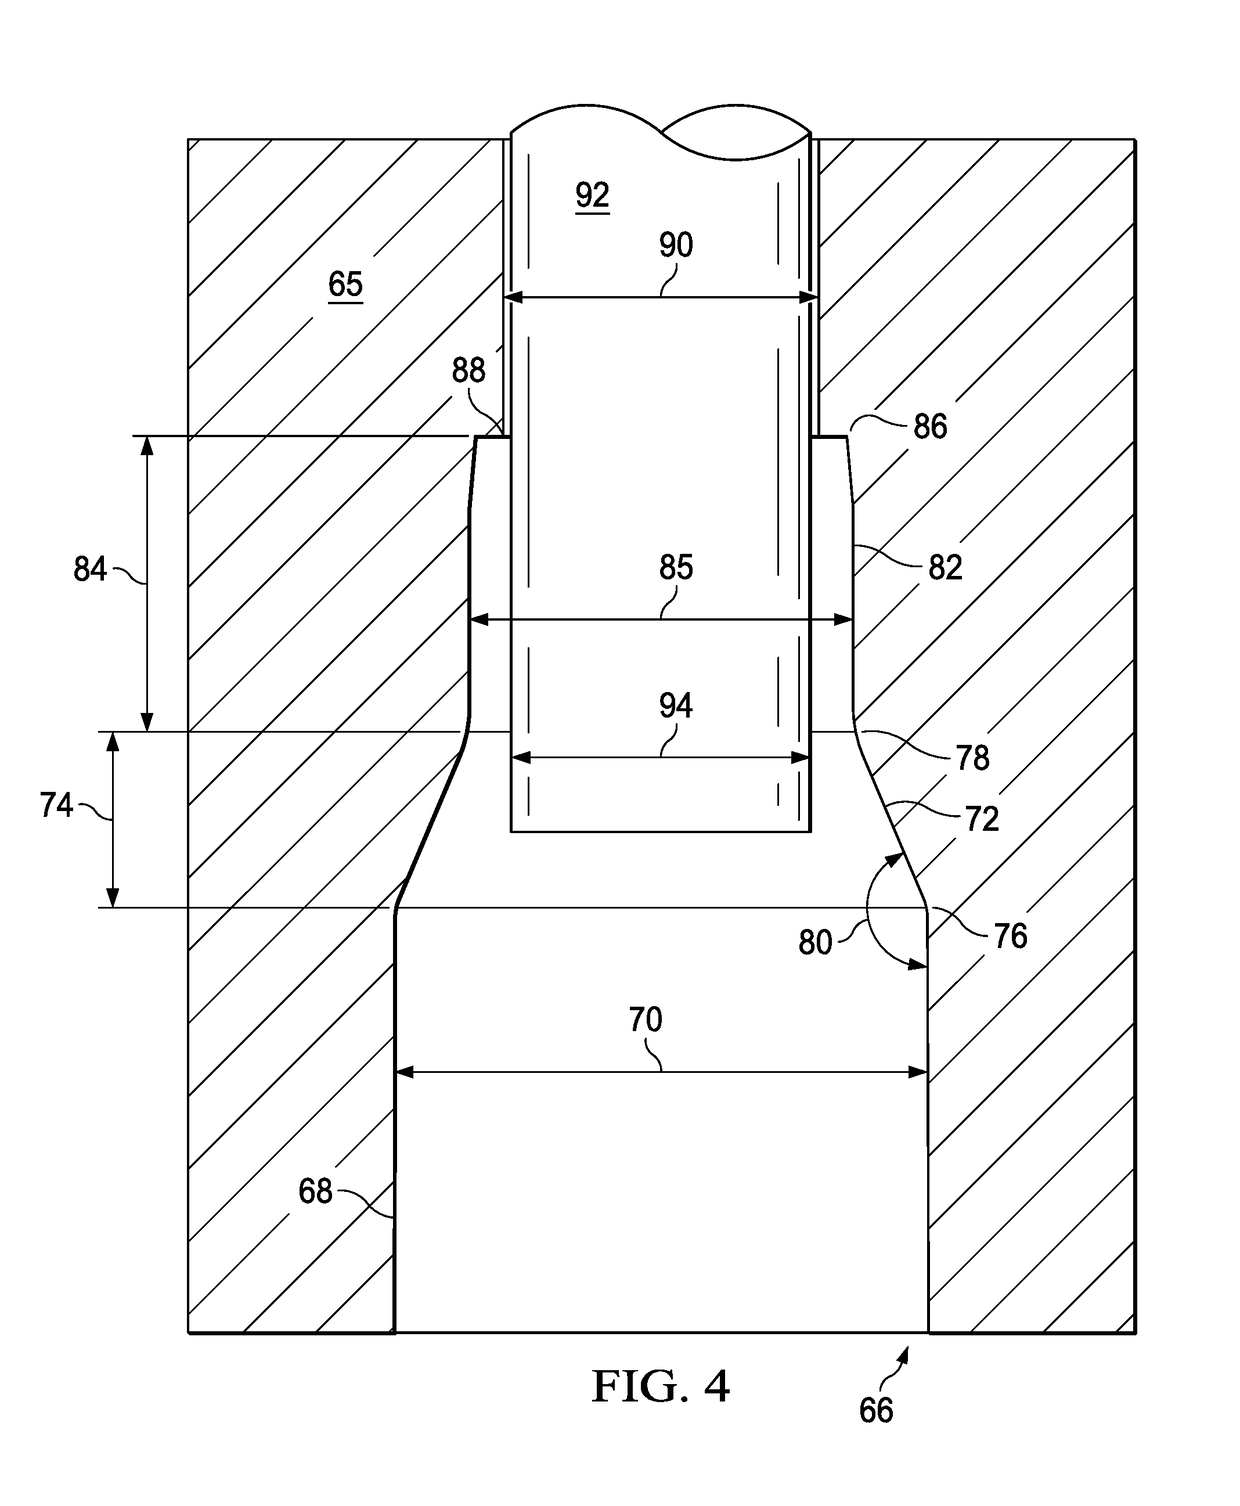 One piece polymer ammunition cartridge having a primer insert and methods of making the same